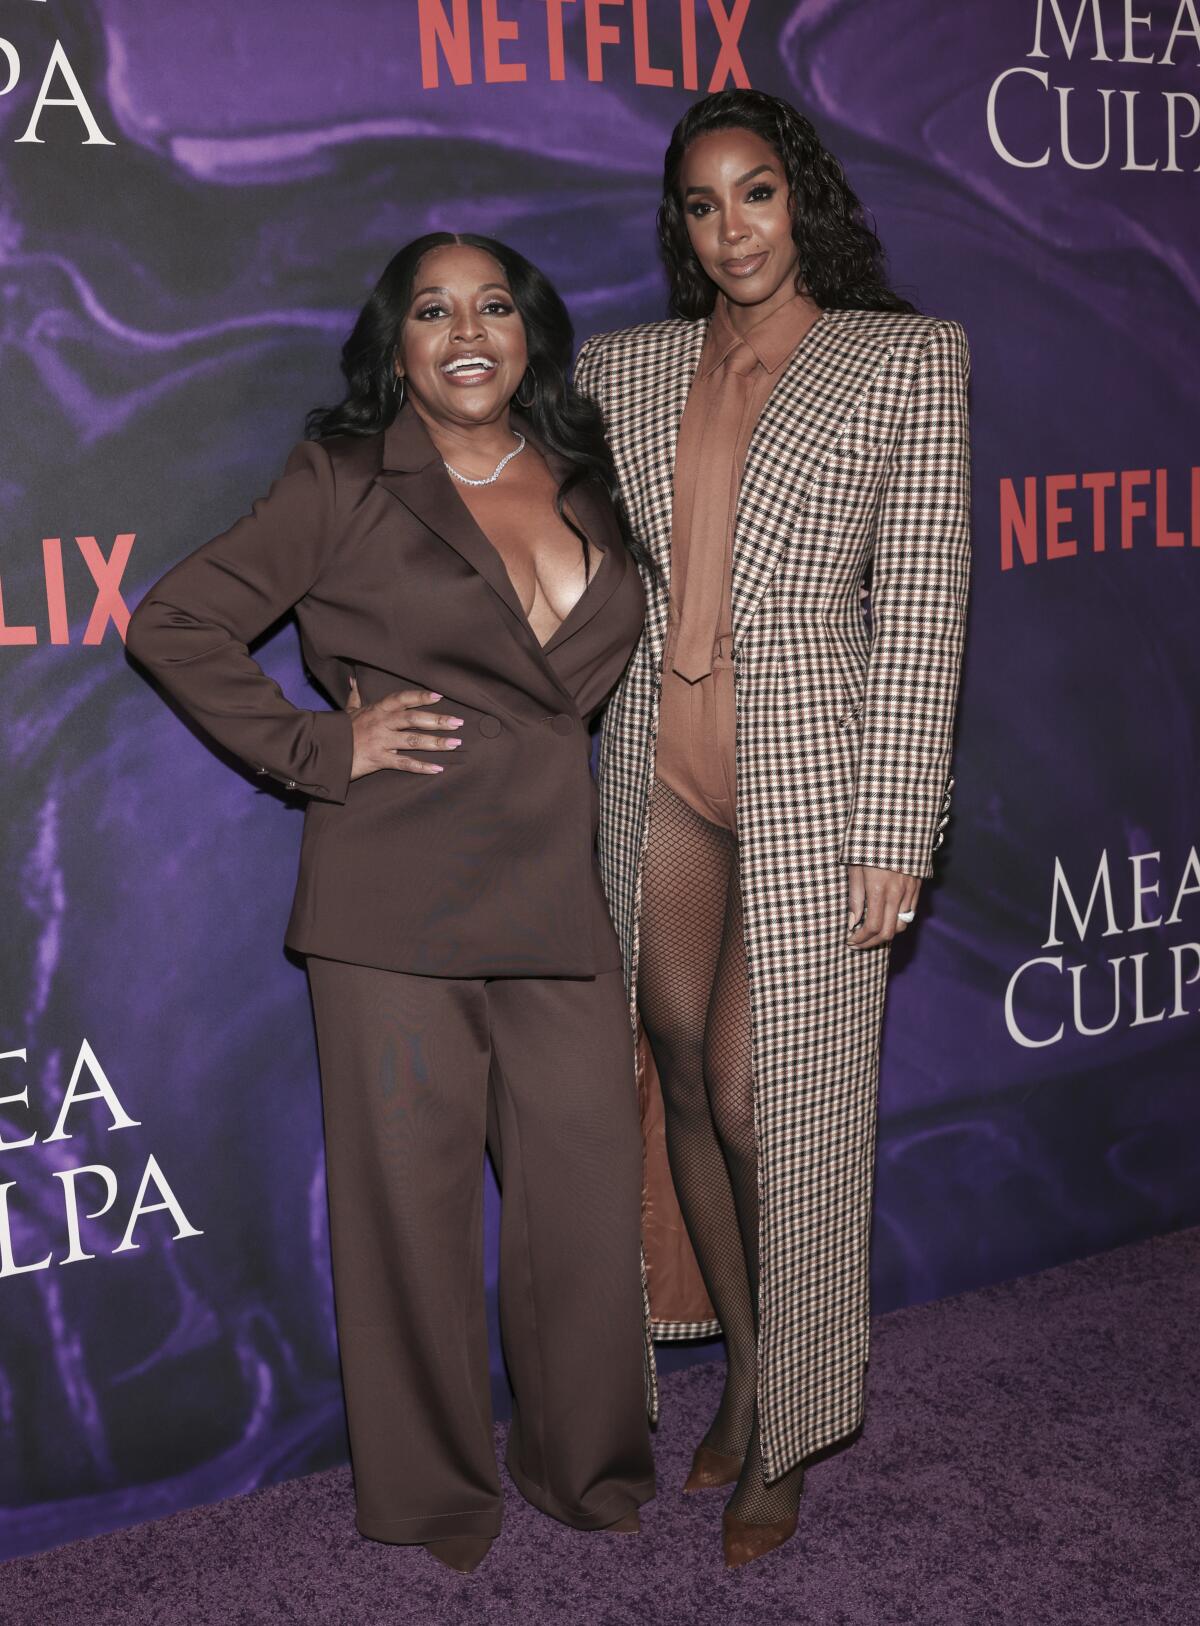 Sherri Shepherd in a brown suit standing next to Kelly Rowland in a long brown, checkered coat against a purple backdrop